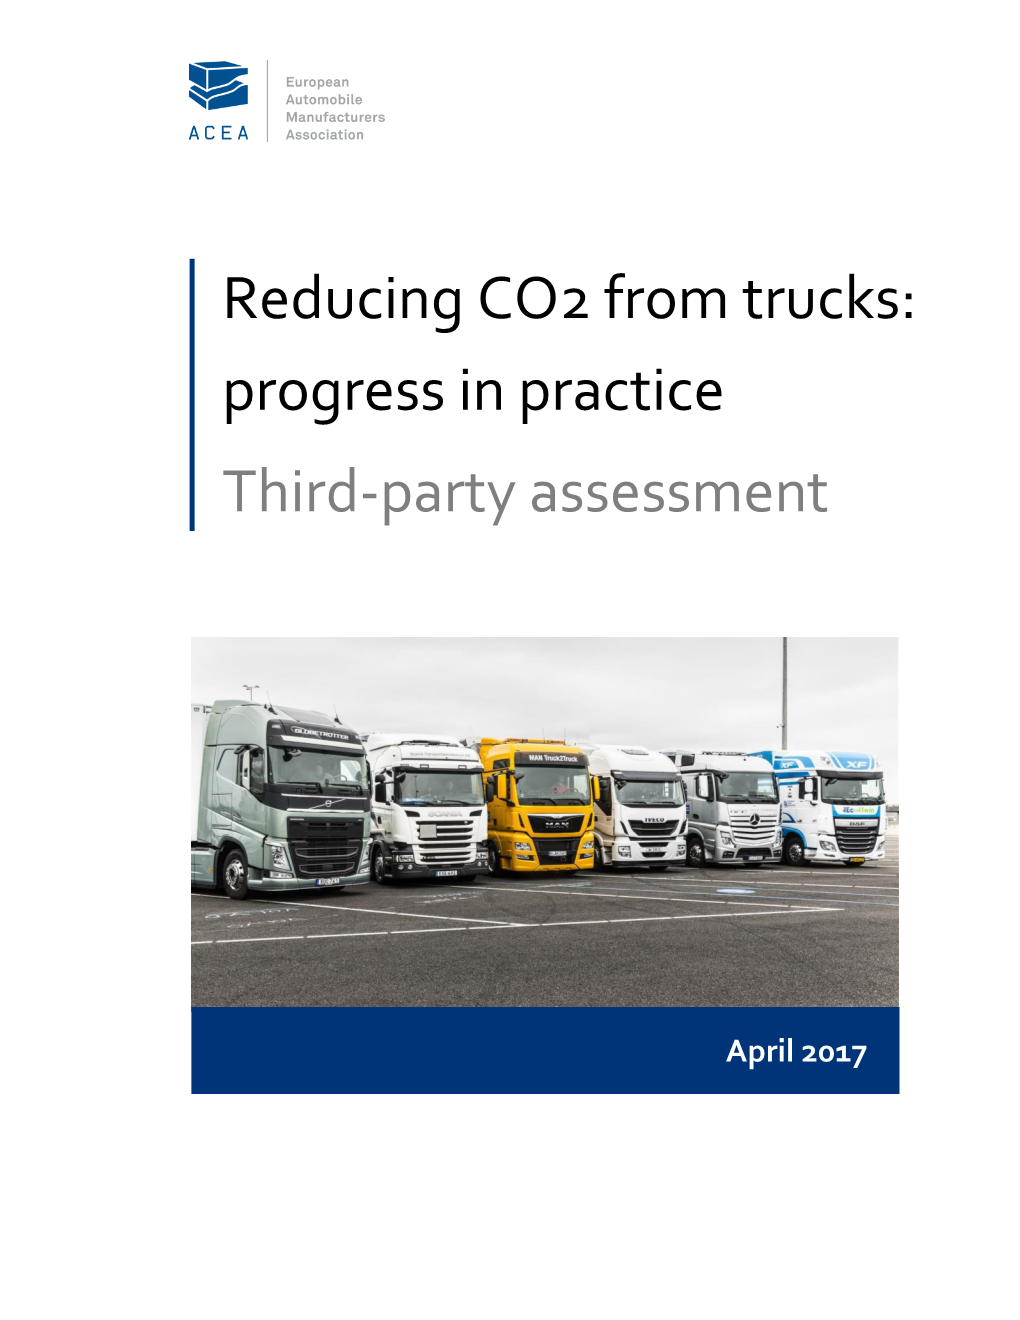 Reducing CO2 from Trucks: Progress in Practice Third-Party Assessment